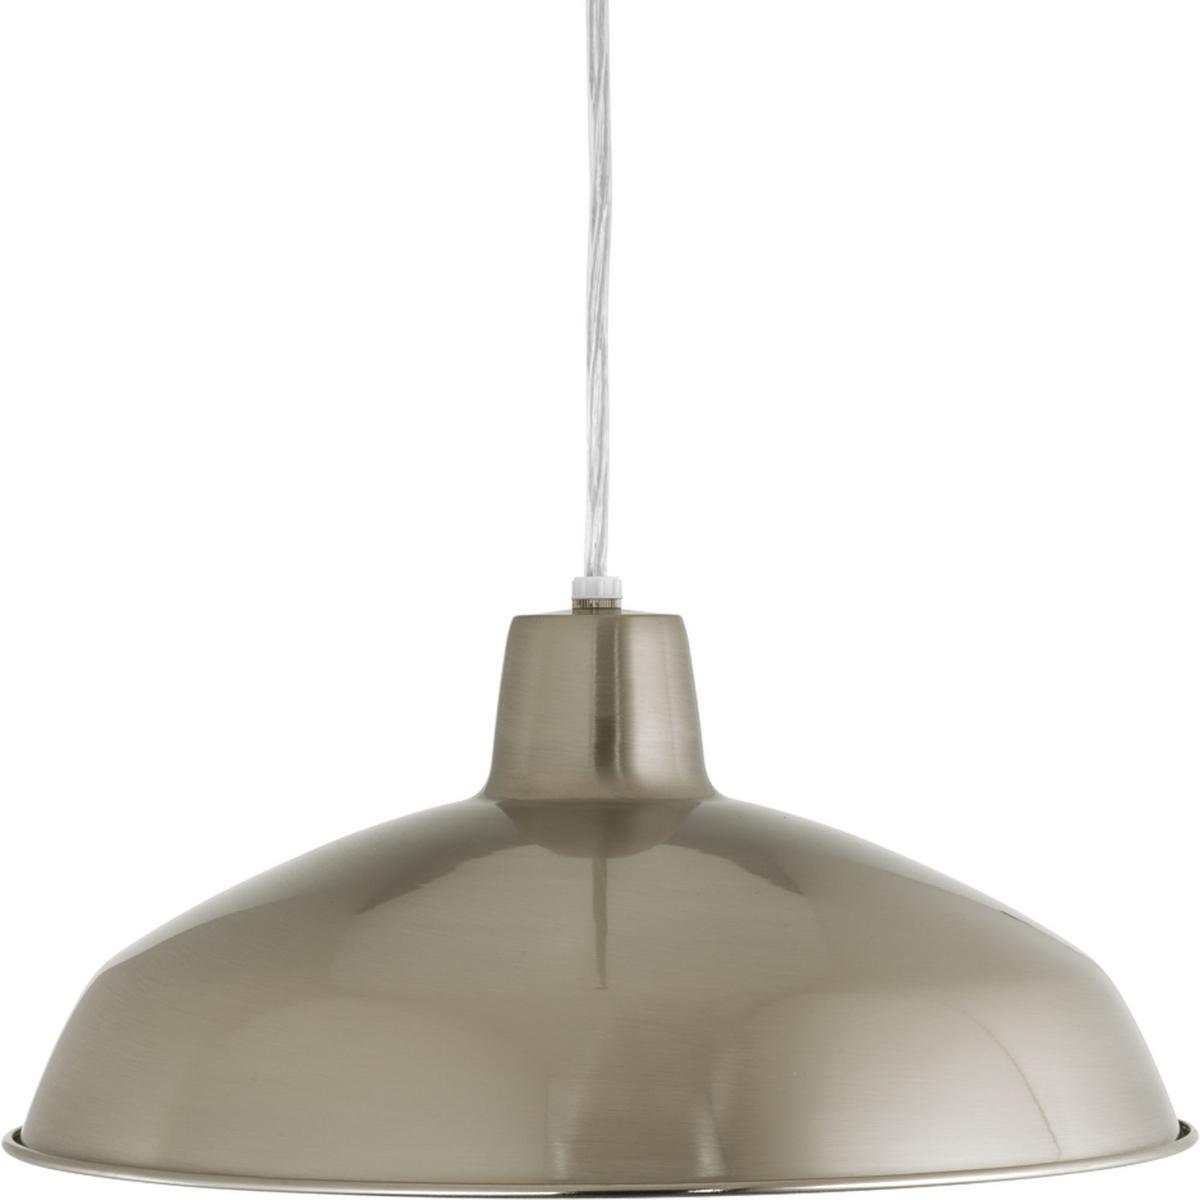 Hubbell P5094-0930K9 One-light LED industrial style warehouse cord-hung pendant with spun metal shade. Gloss white inside shade for reflectivity. 3000K, 90CRI, 1,211 lumens 71.2 lumens/watt per module (source). Brushed Nickel finish.  ; One-light LED industrial style warehous